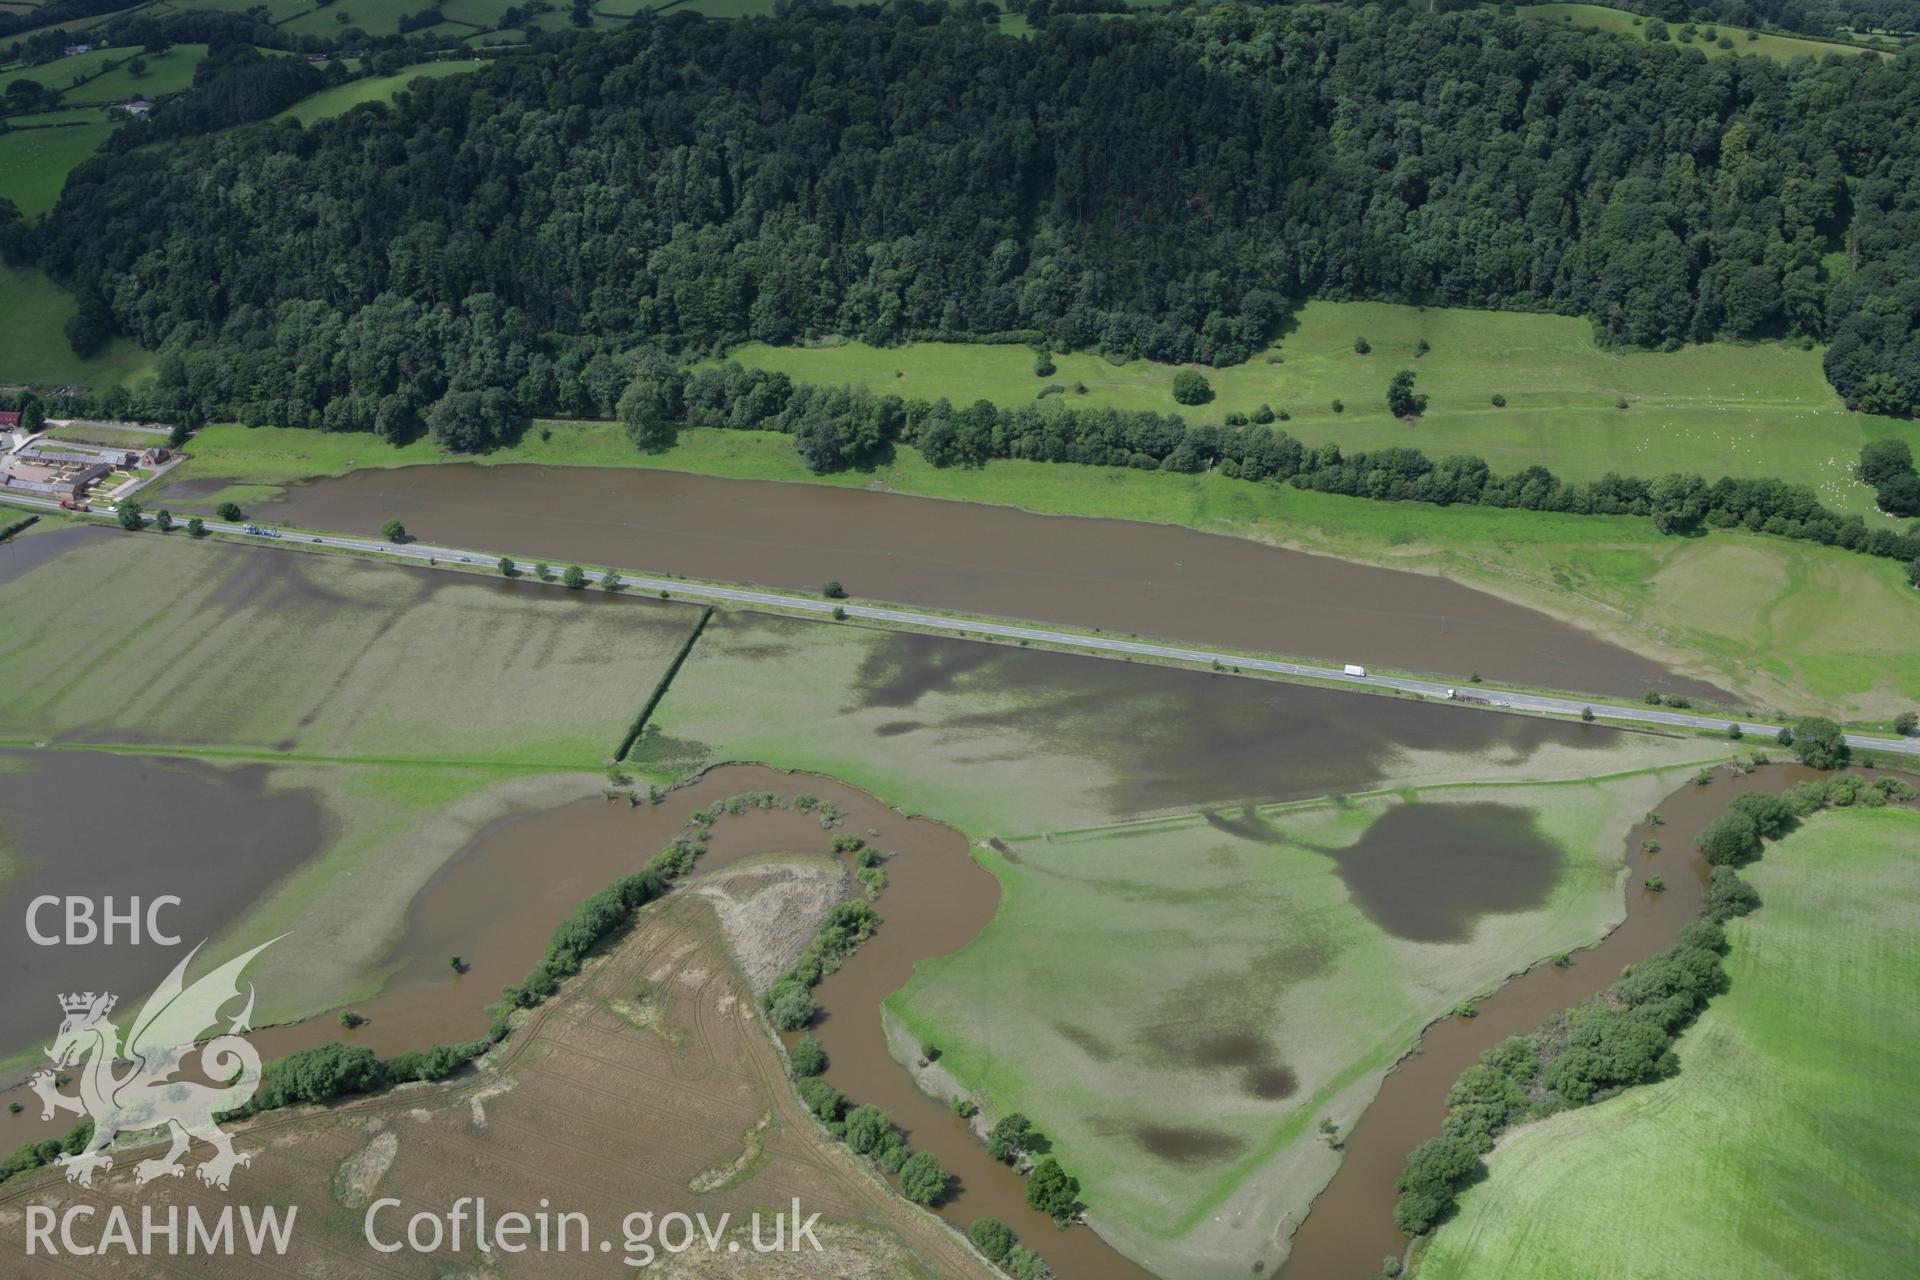 RCAHMW colour oblique aerial photograph of River Severn in flood near Buttington. Taken on 24 July 2007 by Toby Driver